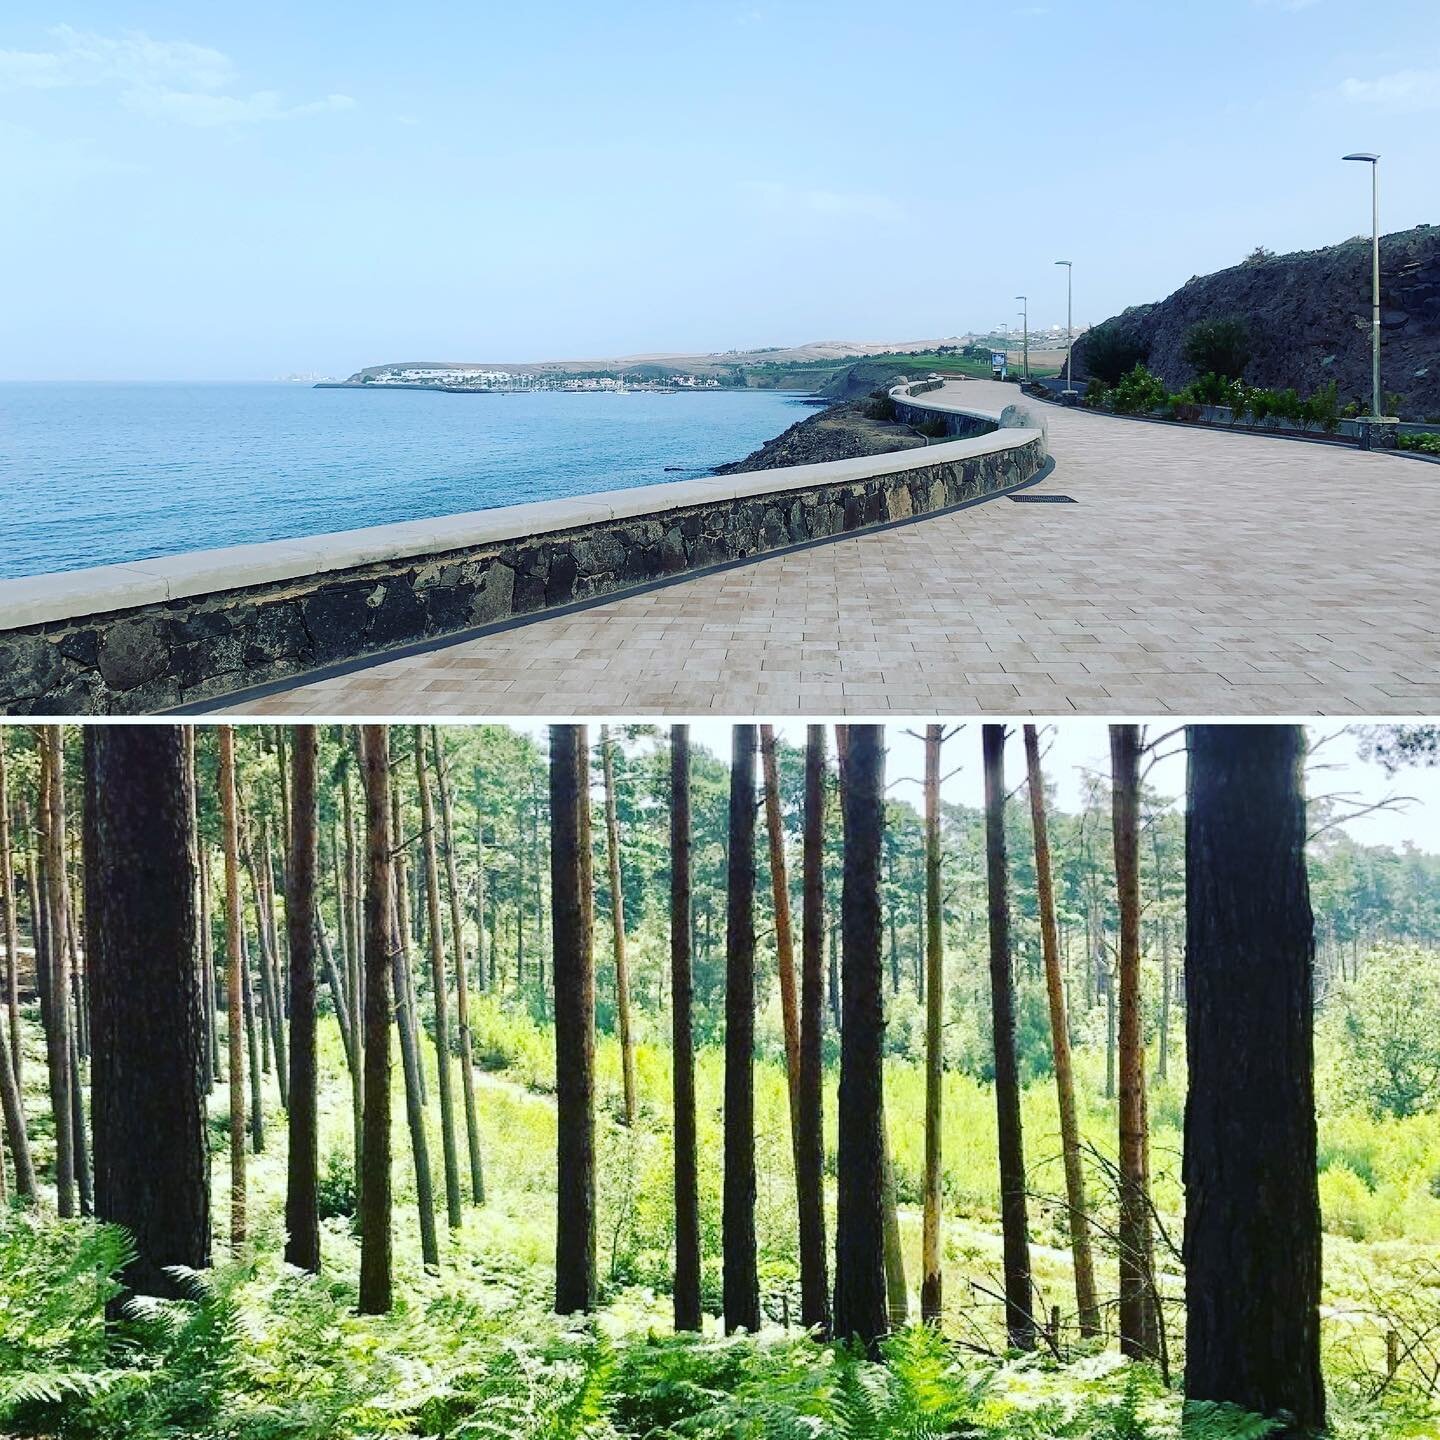 Holiday running route vs home running route, could not be more different. Will miss the flats! #run #running #bournewoods #grancanaria